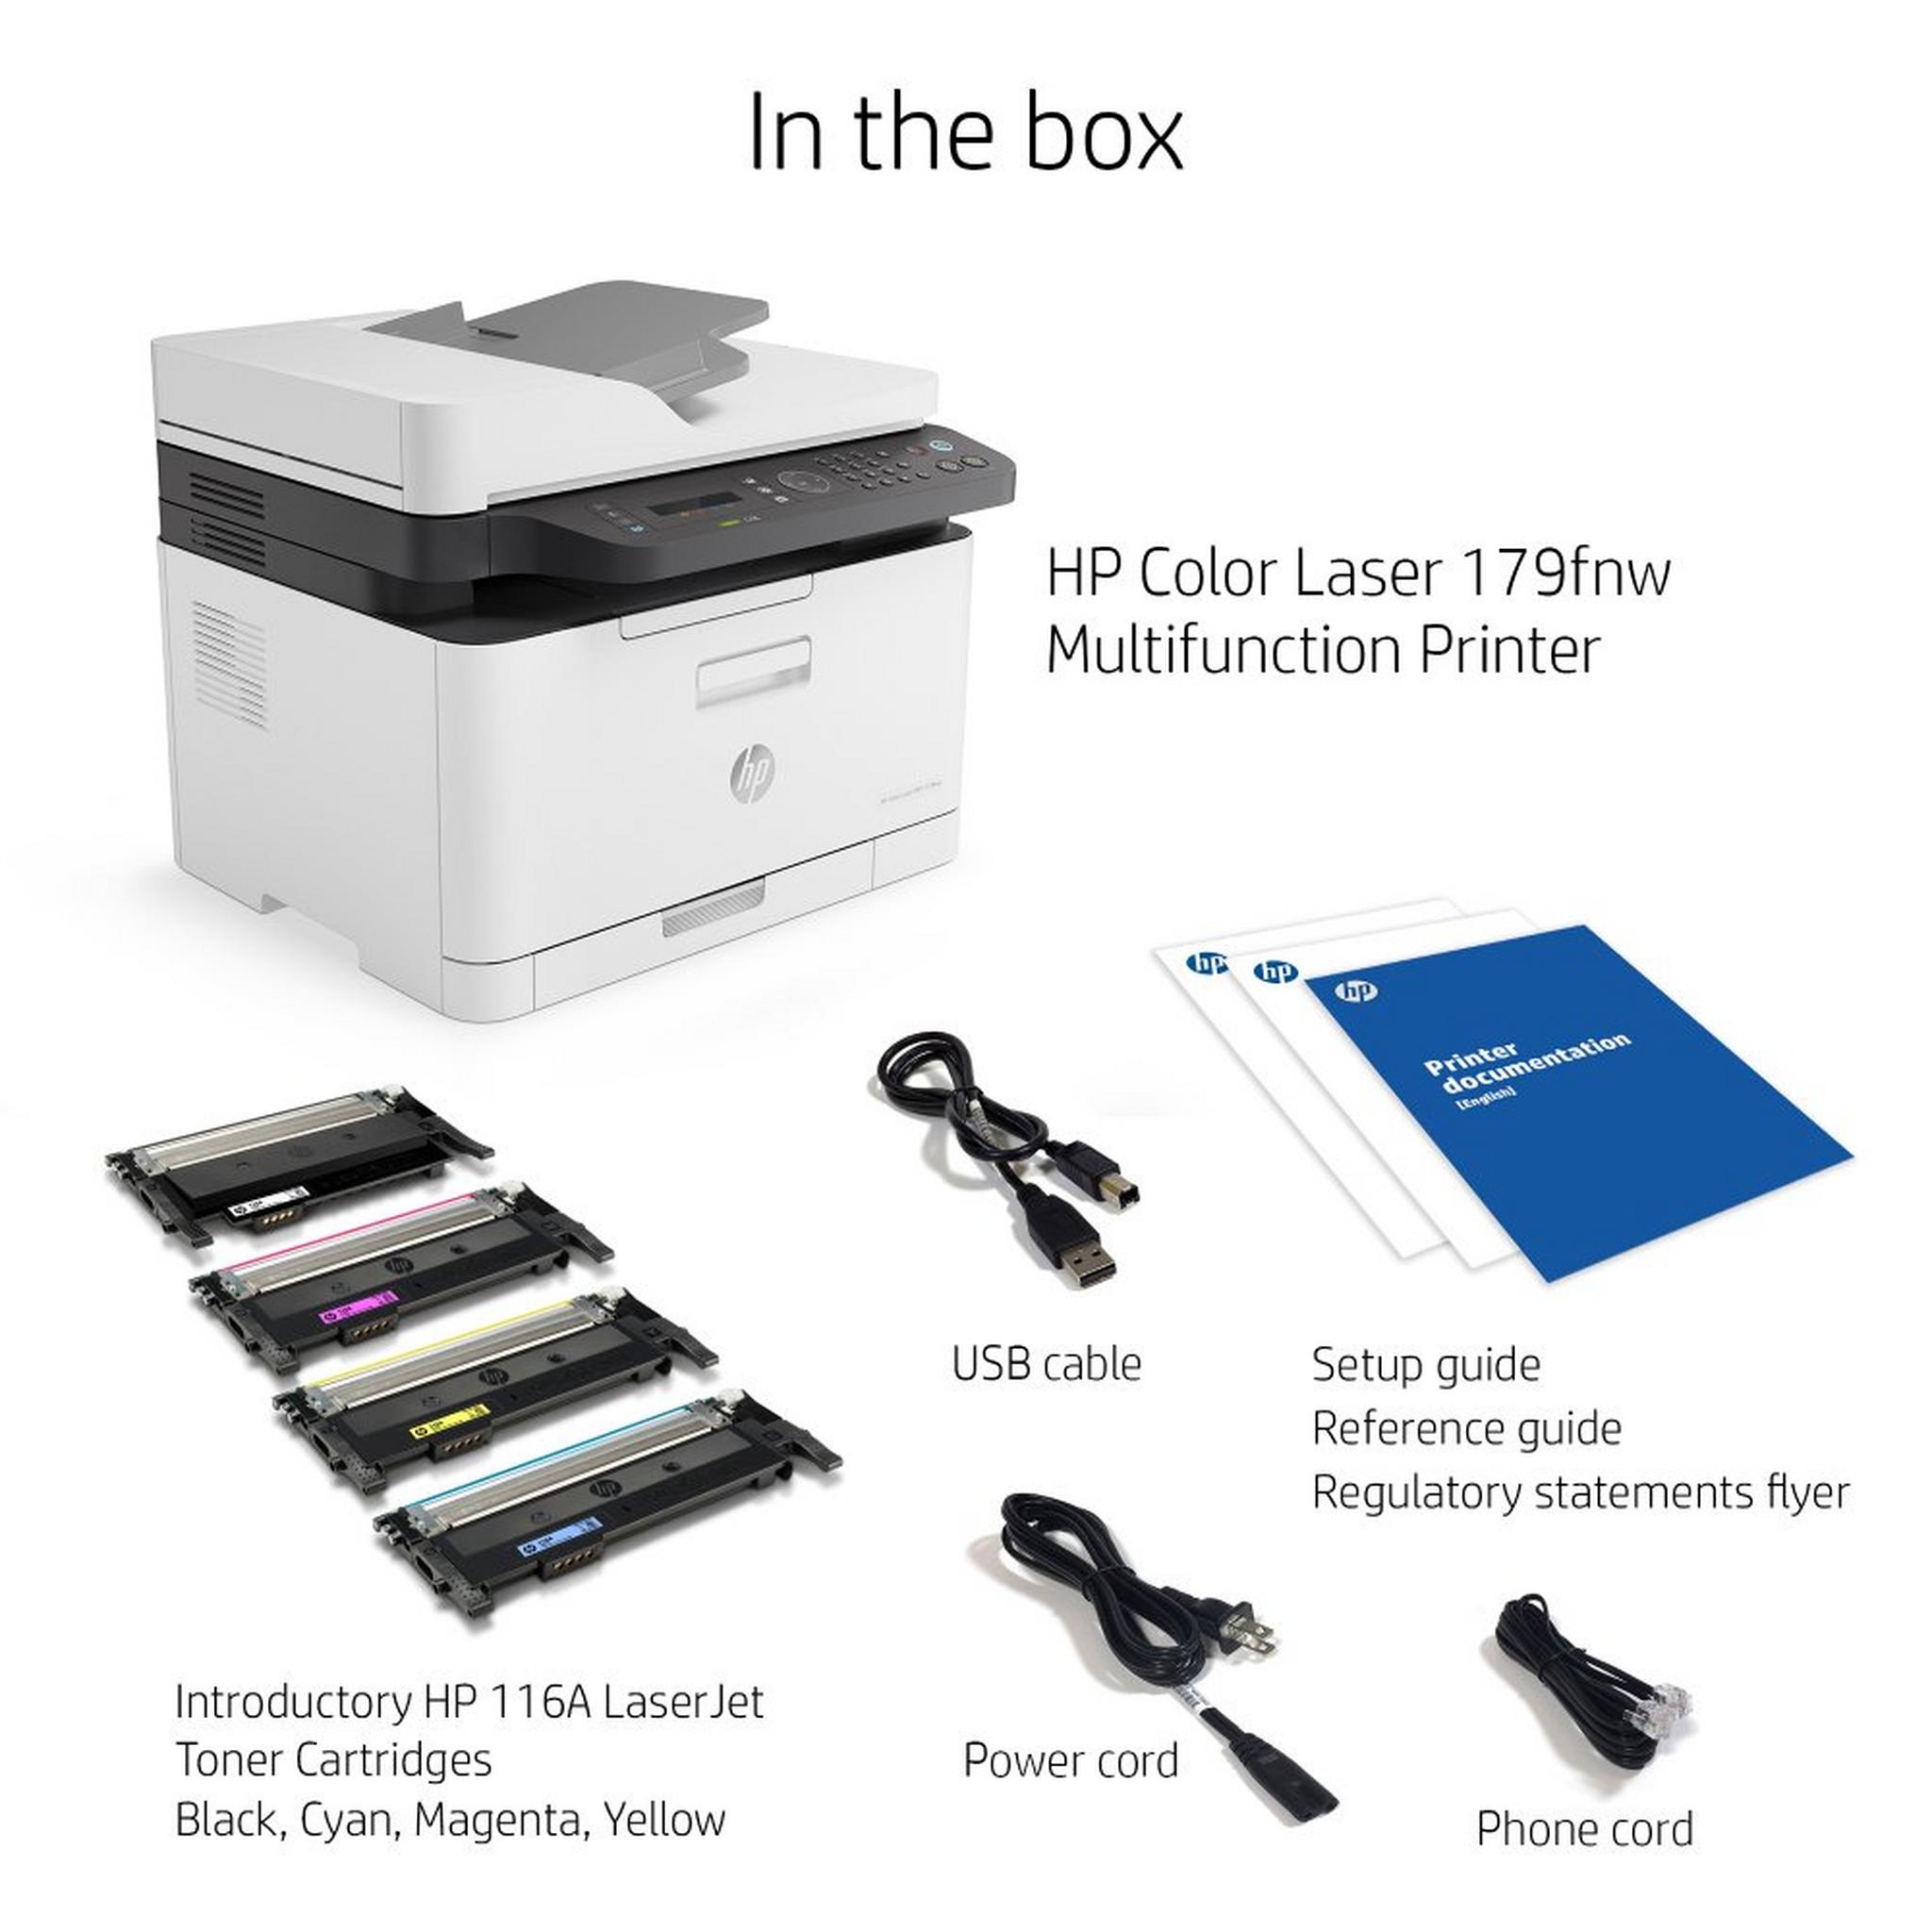 HP Color Laser Multi-function Printer 179fnw - (4ZB97A)